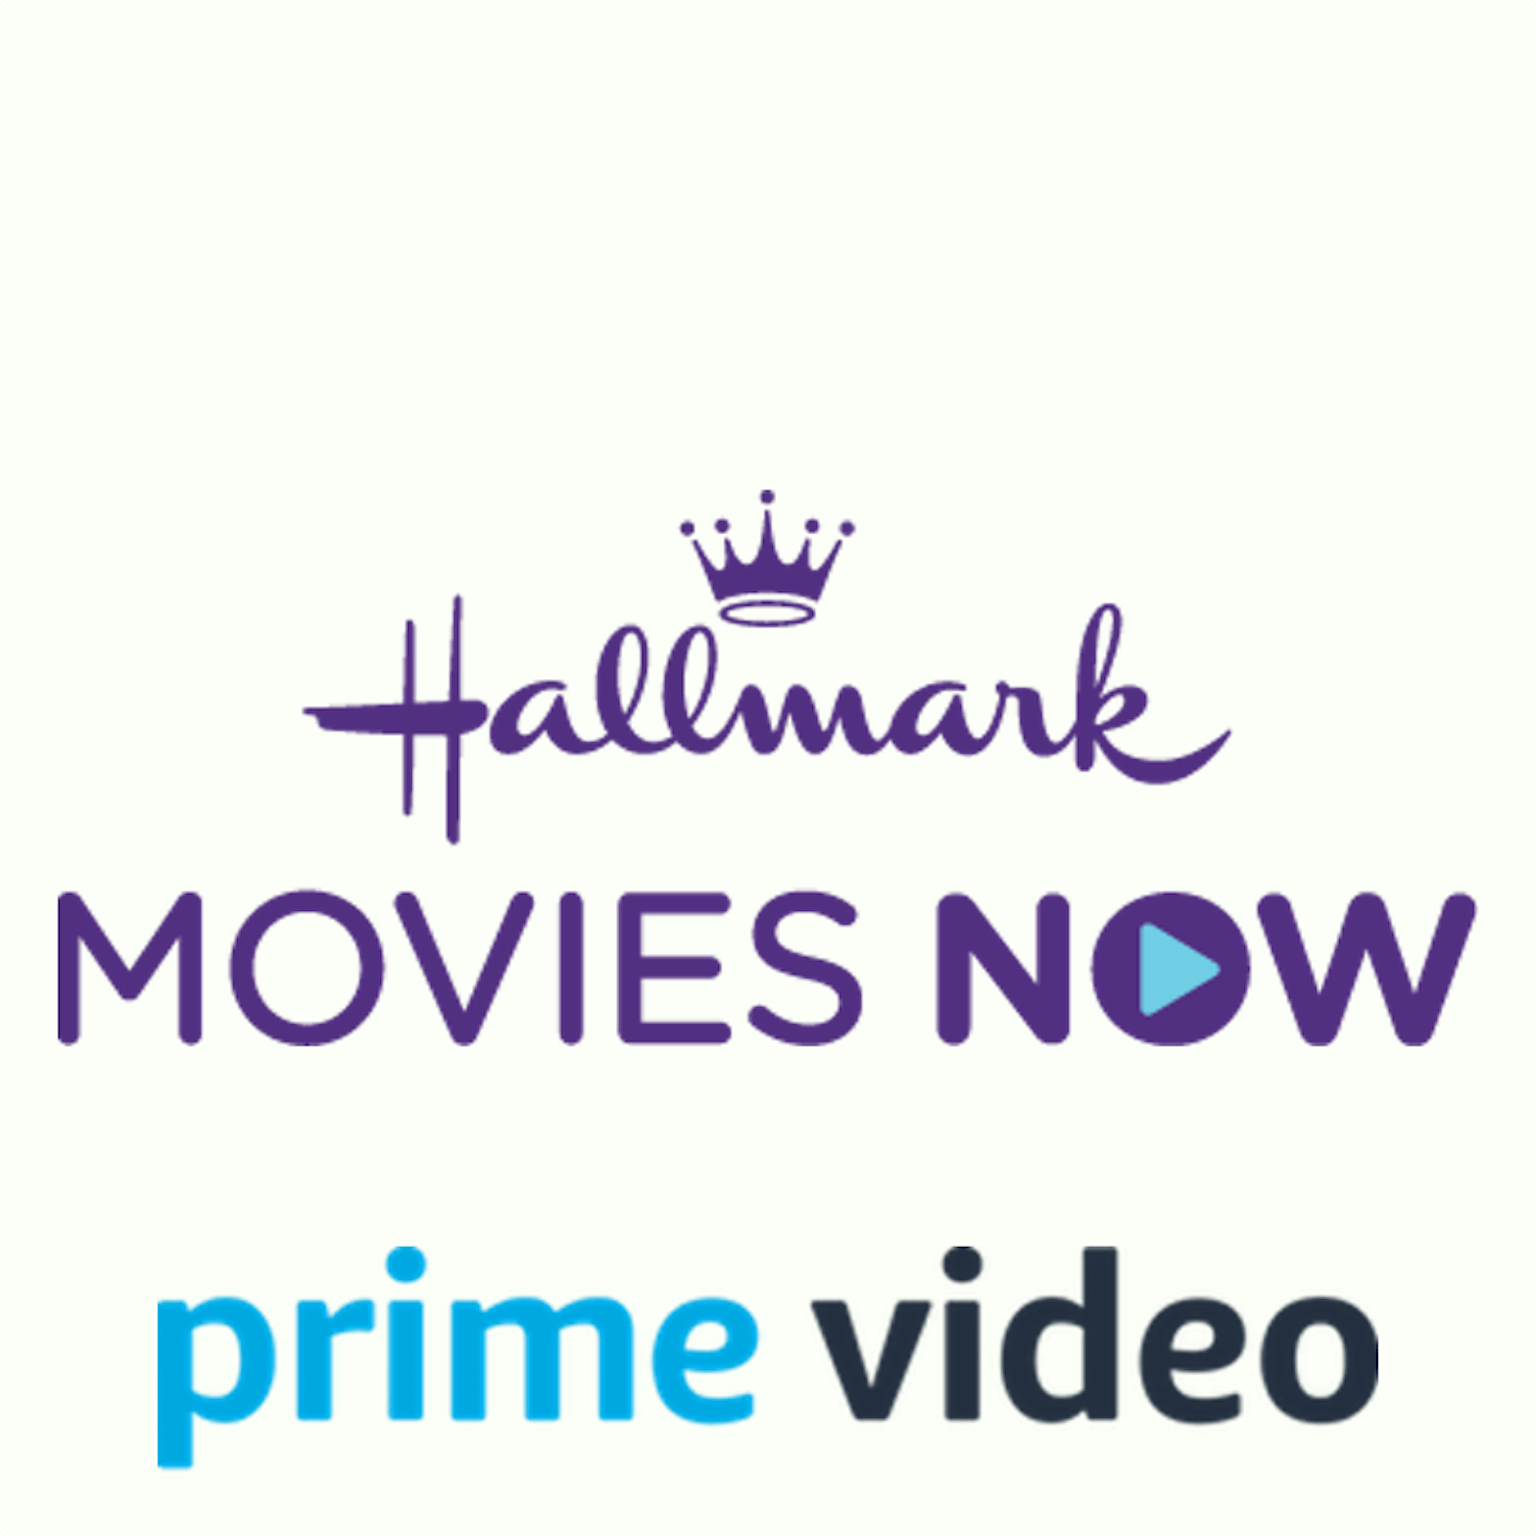 Amazon Prime Channels: The 20 Best Channels for TV and Movies [2020]